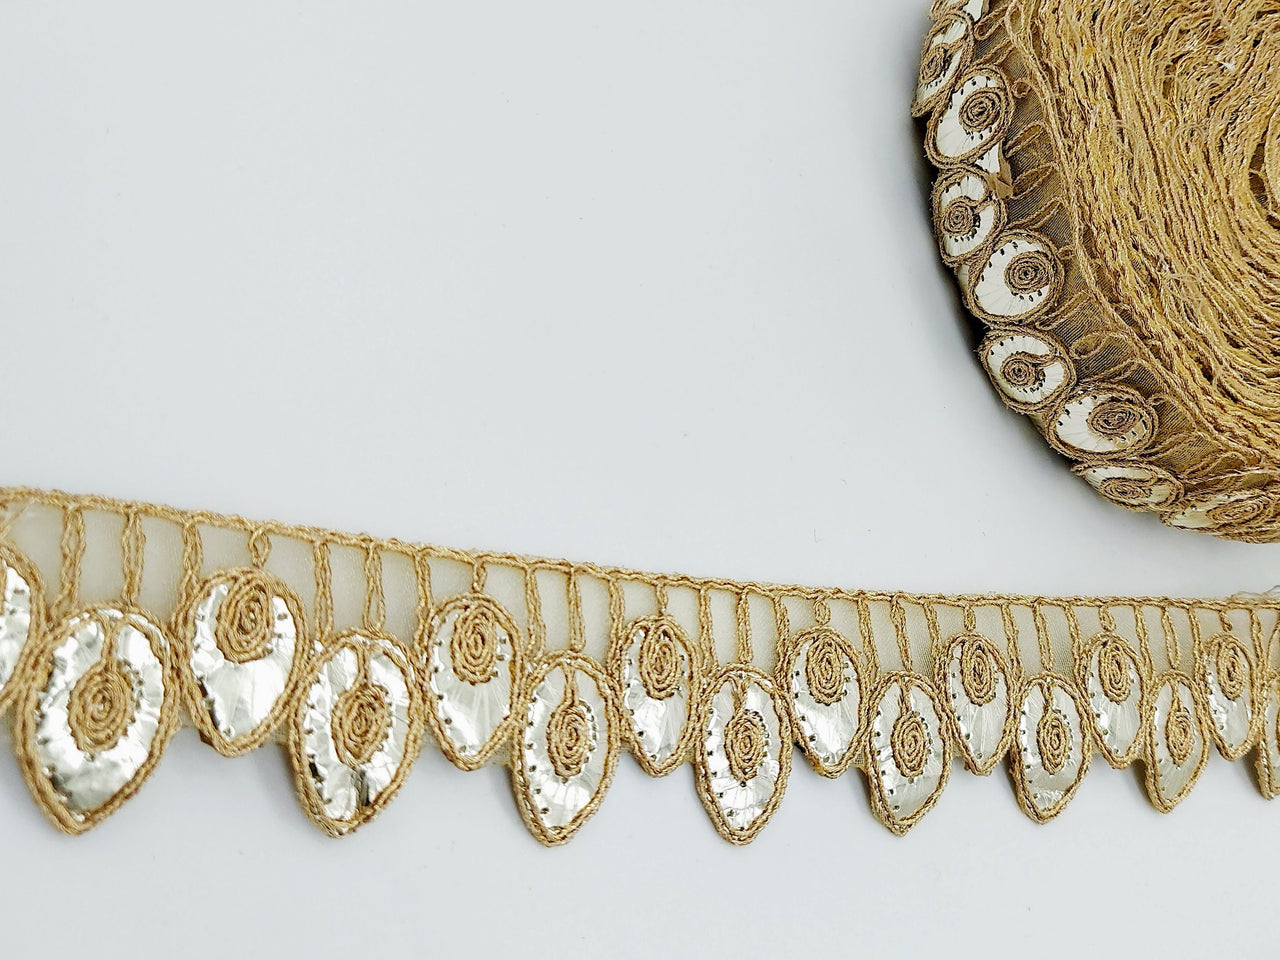 9 Yards Sheer Gold Tissue Fabric Scalloped Lace Trim with Indian Gold Foil Work Gota Patti Sari Border